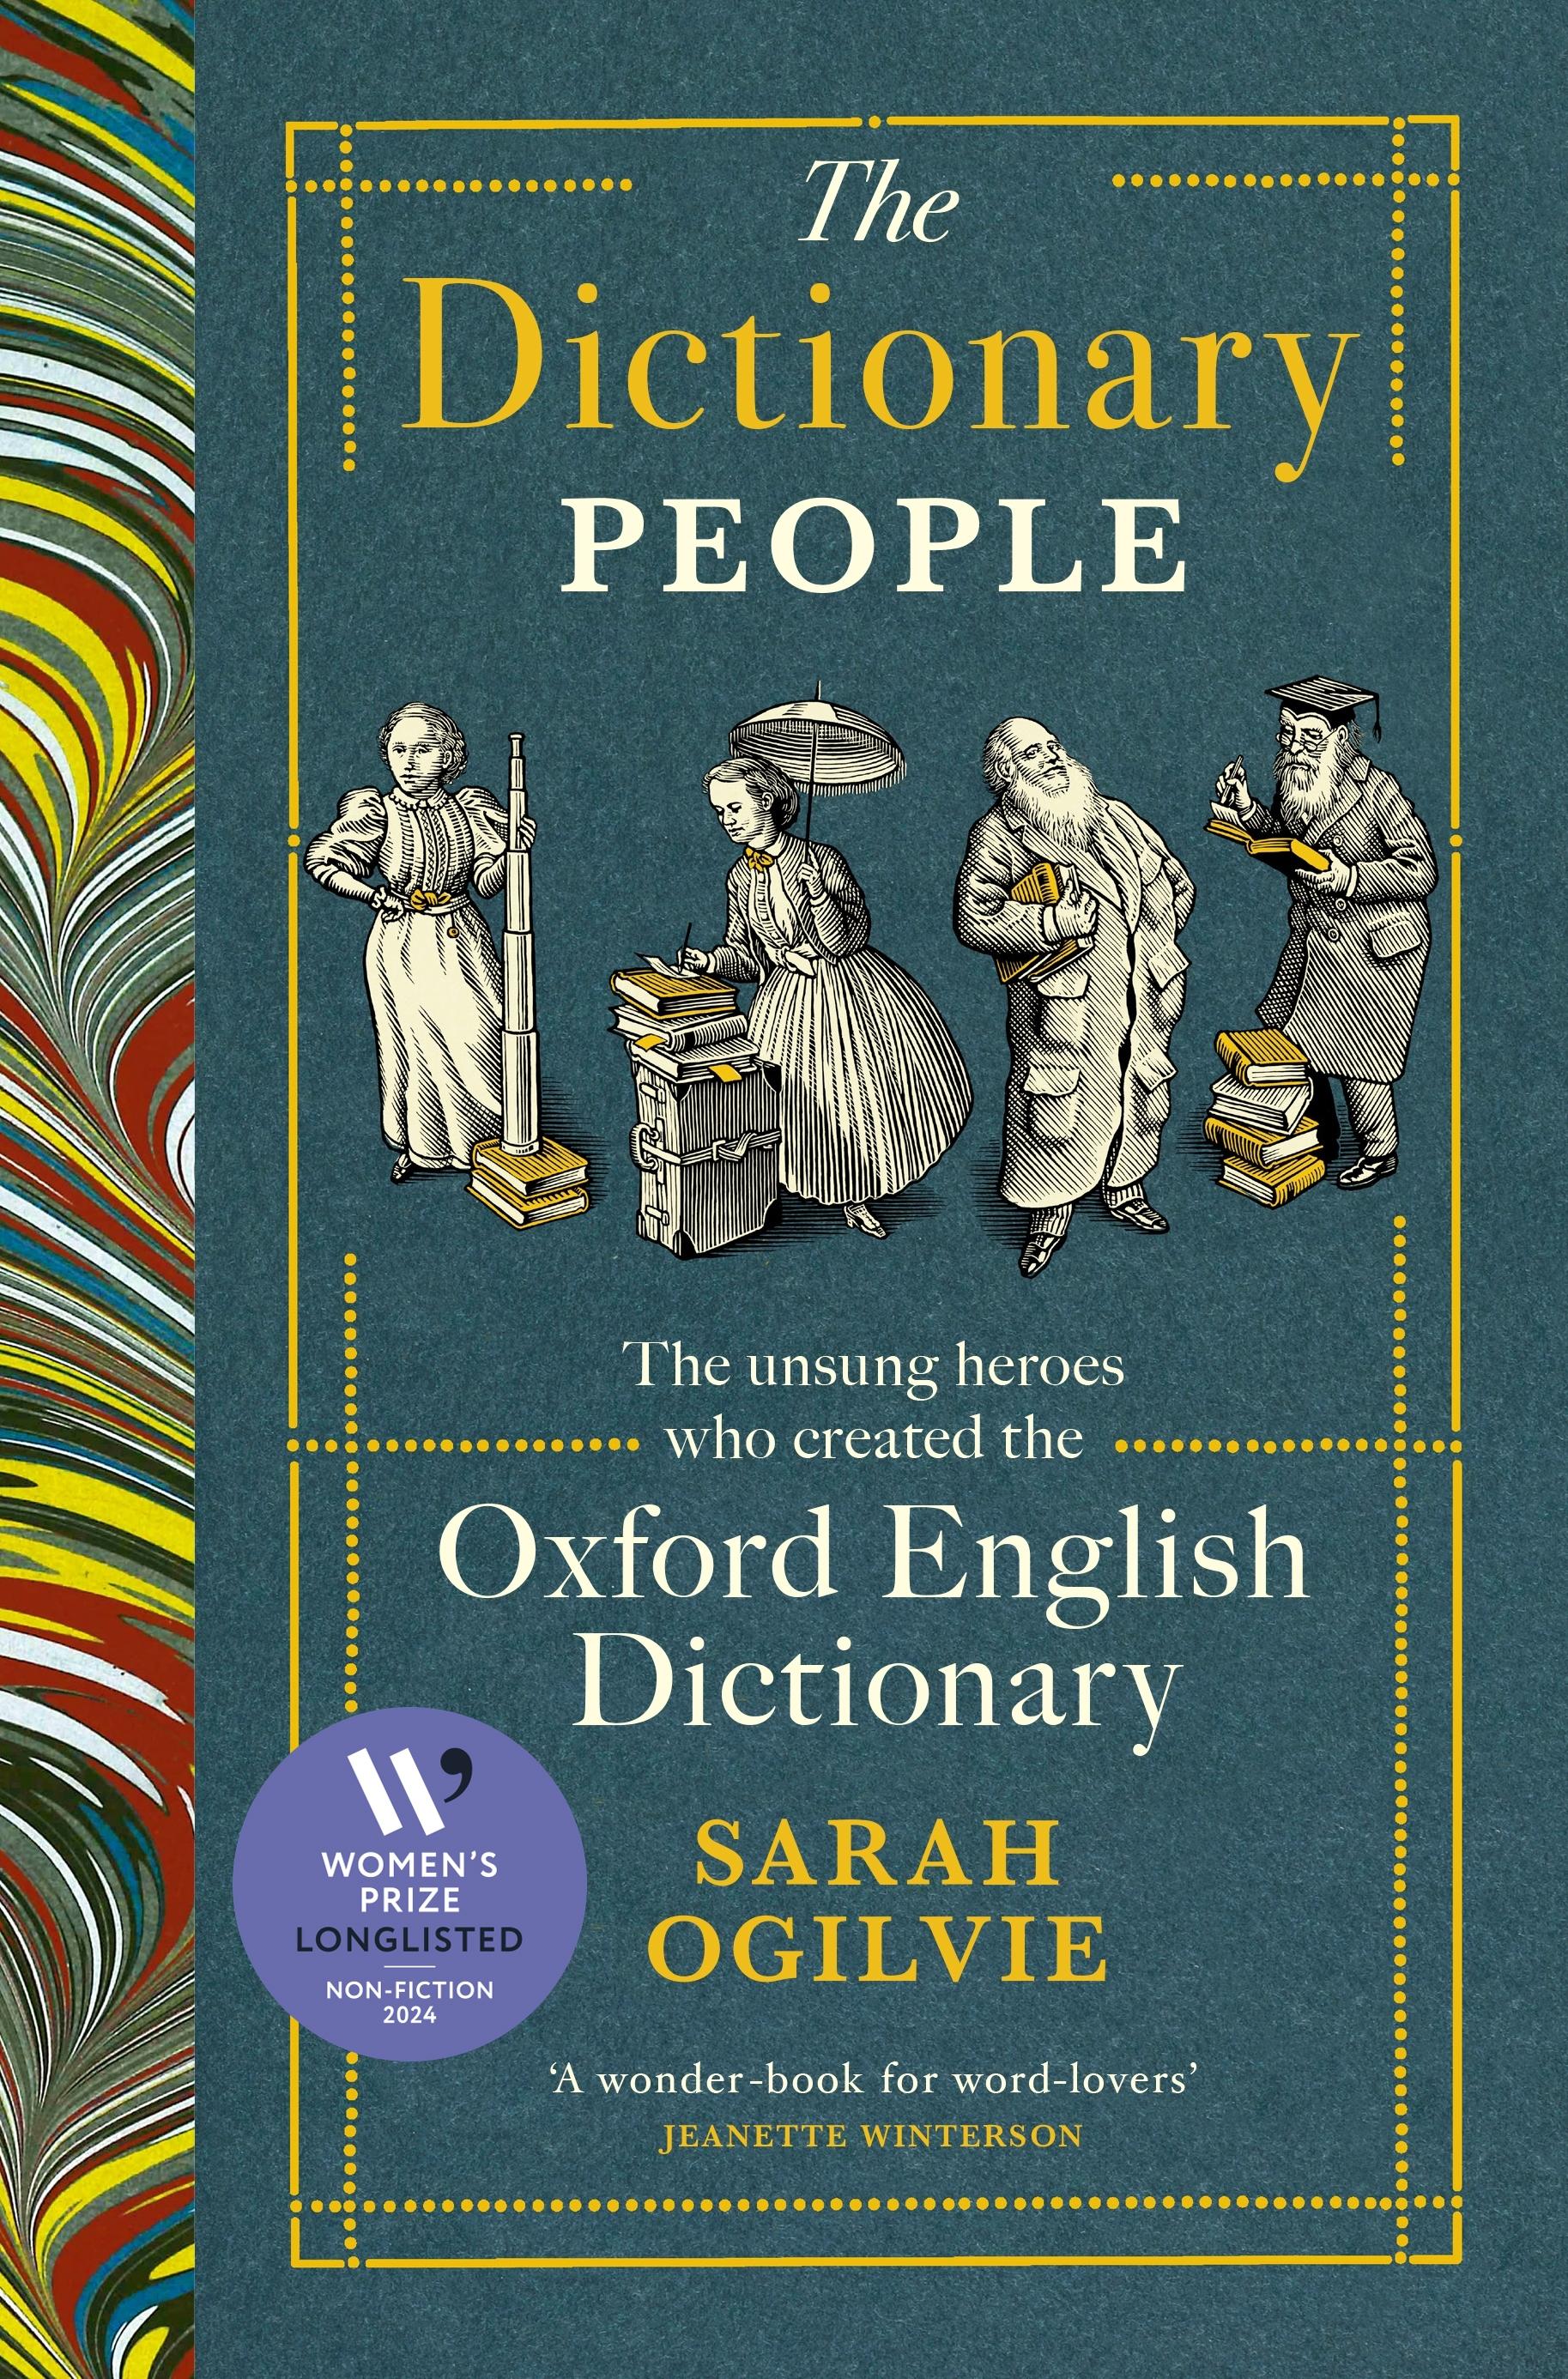 The Dictionary People / The unsung heroes who created the Oxford English Dictionary / Sarah Ogilvie / Buch / Gebunden / 2023 / Vintage Publishing / EAN 9781784744939 - Ogilvie, Sarah